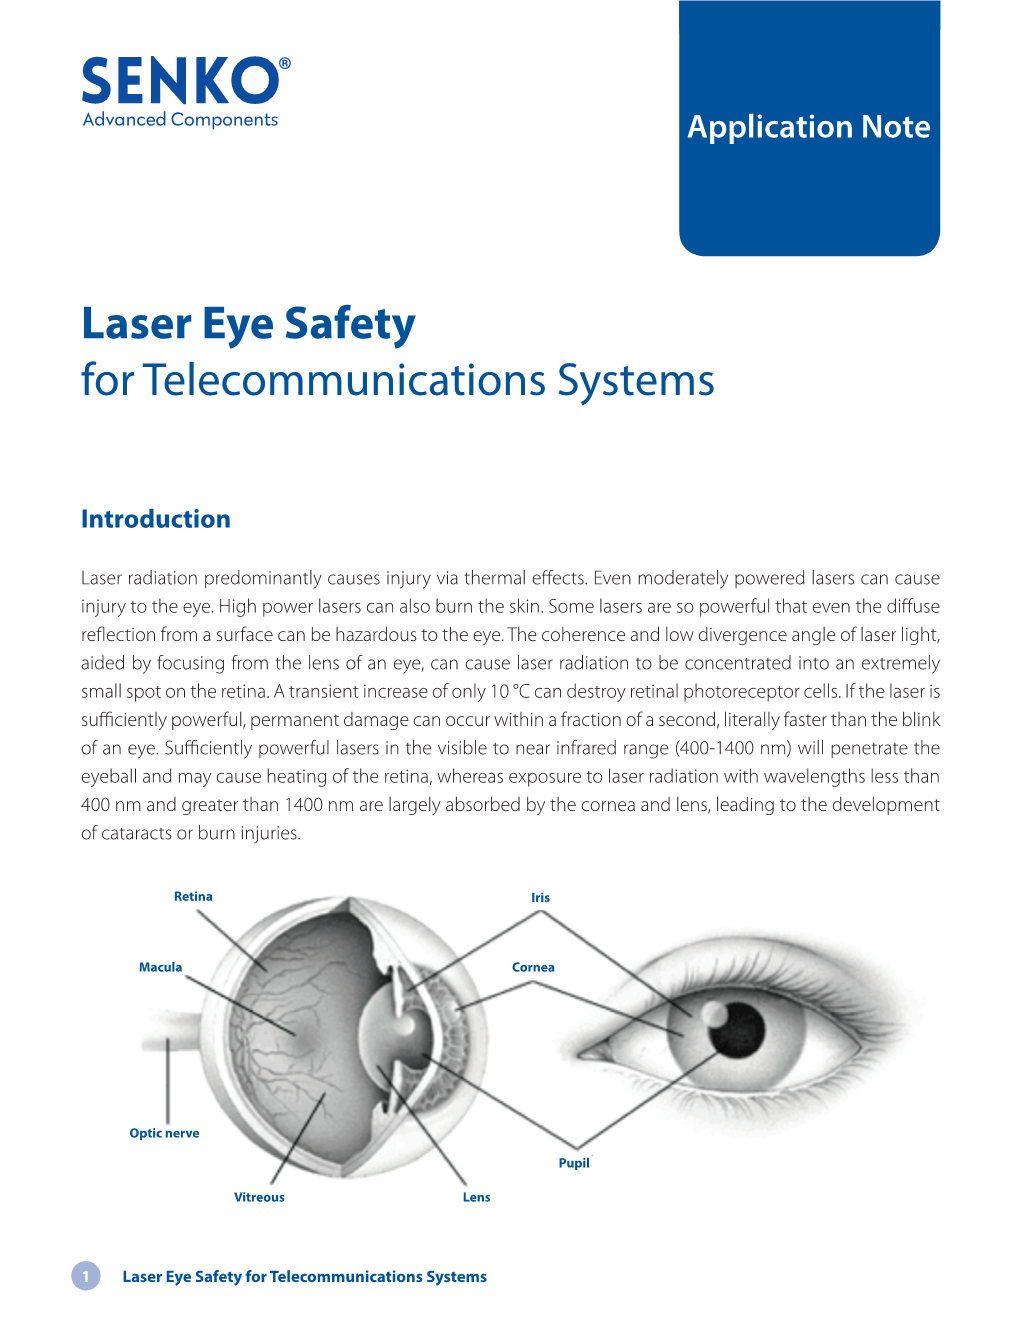 Laser Eye Safety for Telecommunications Systems